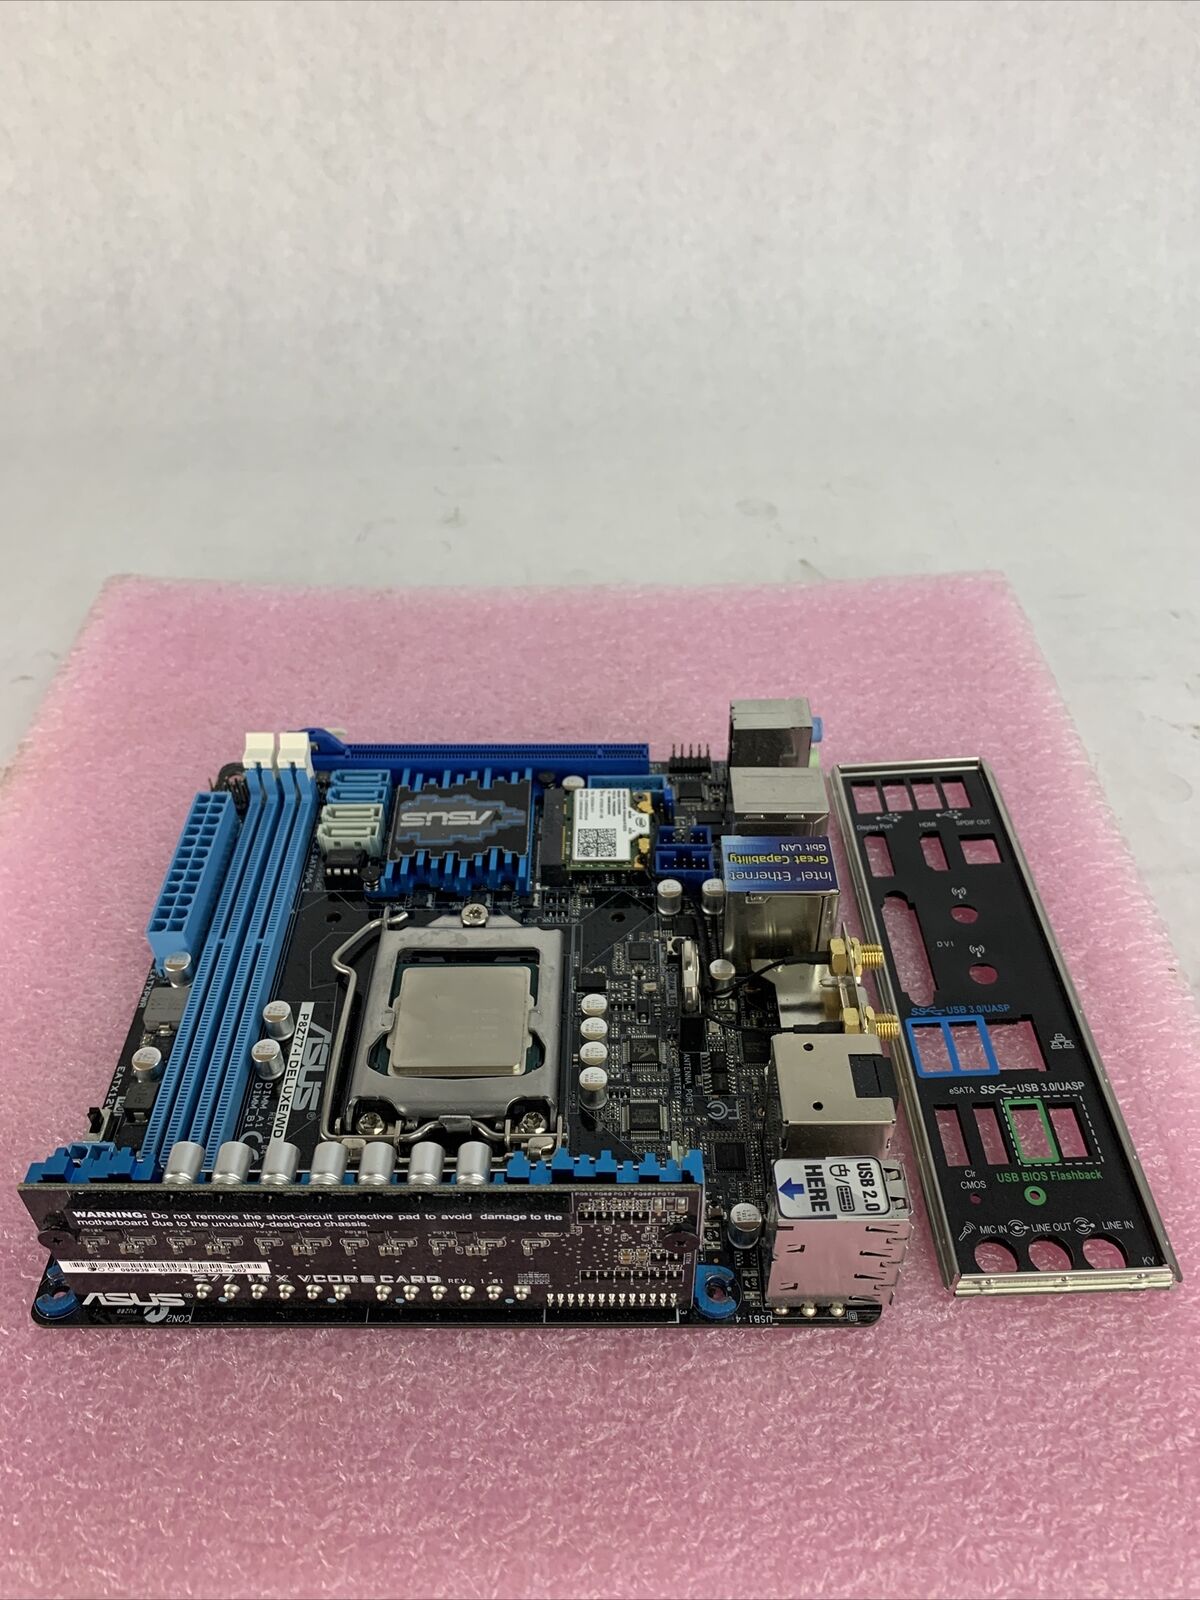 ASUS P8177-I Deluxe/WD Motherboard Intel Core i5-3550 3.3GHz w/ I/O Shield